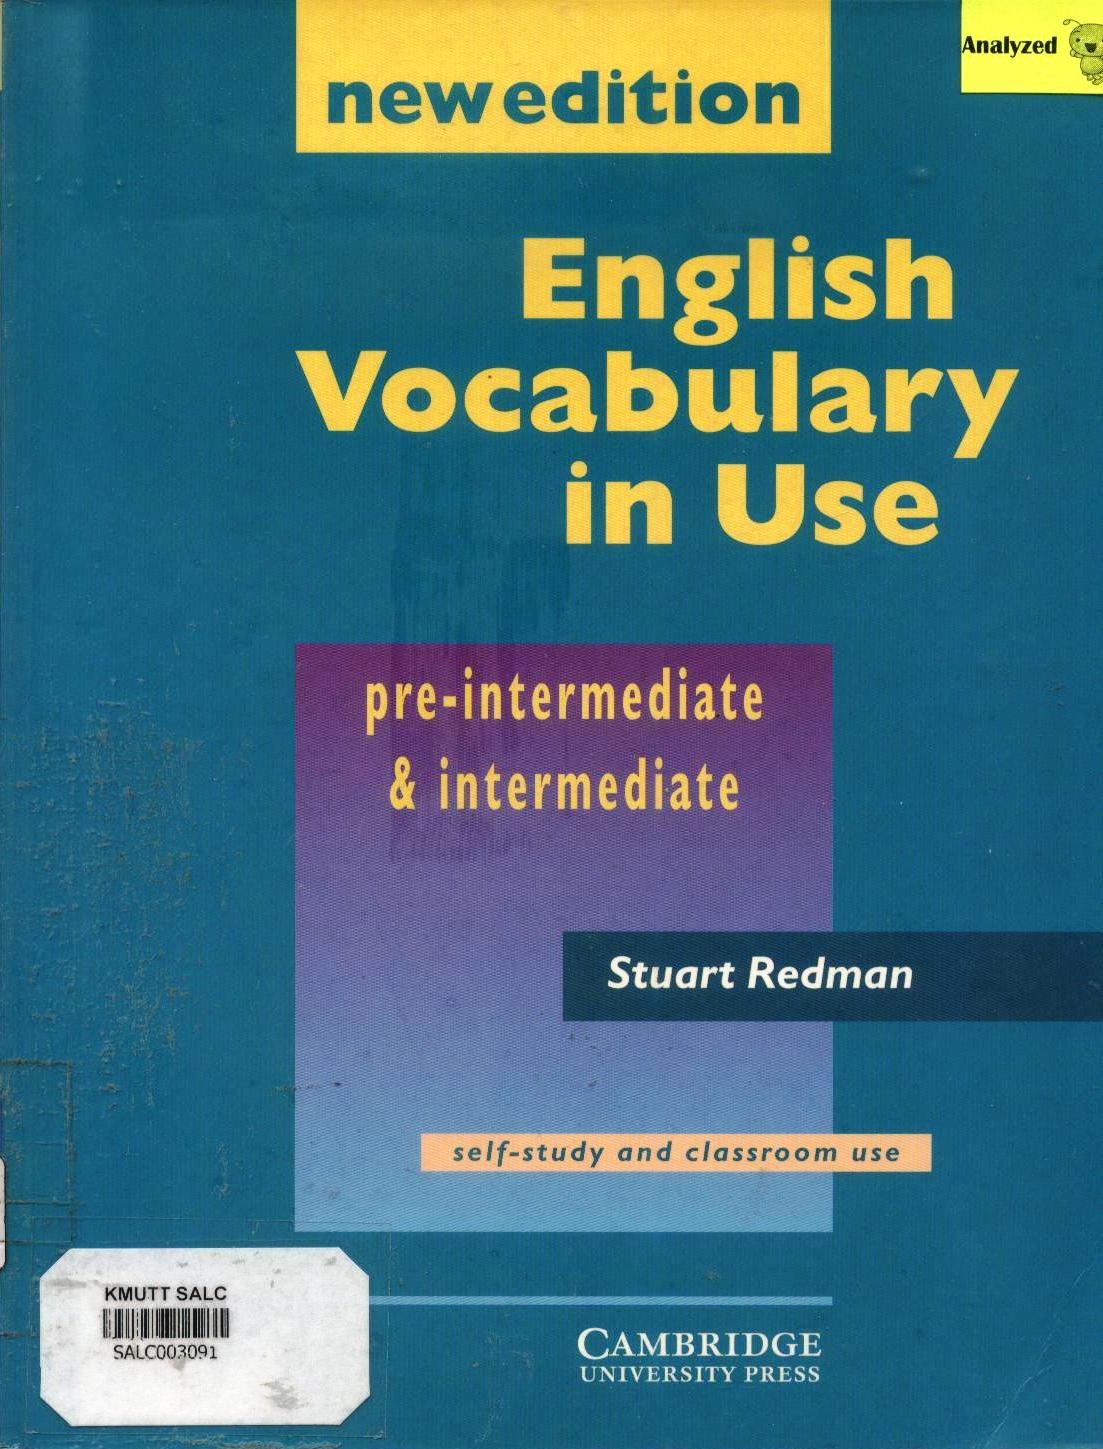 English Vocabulary in Use 1: New Edition